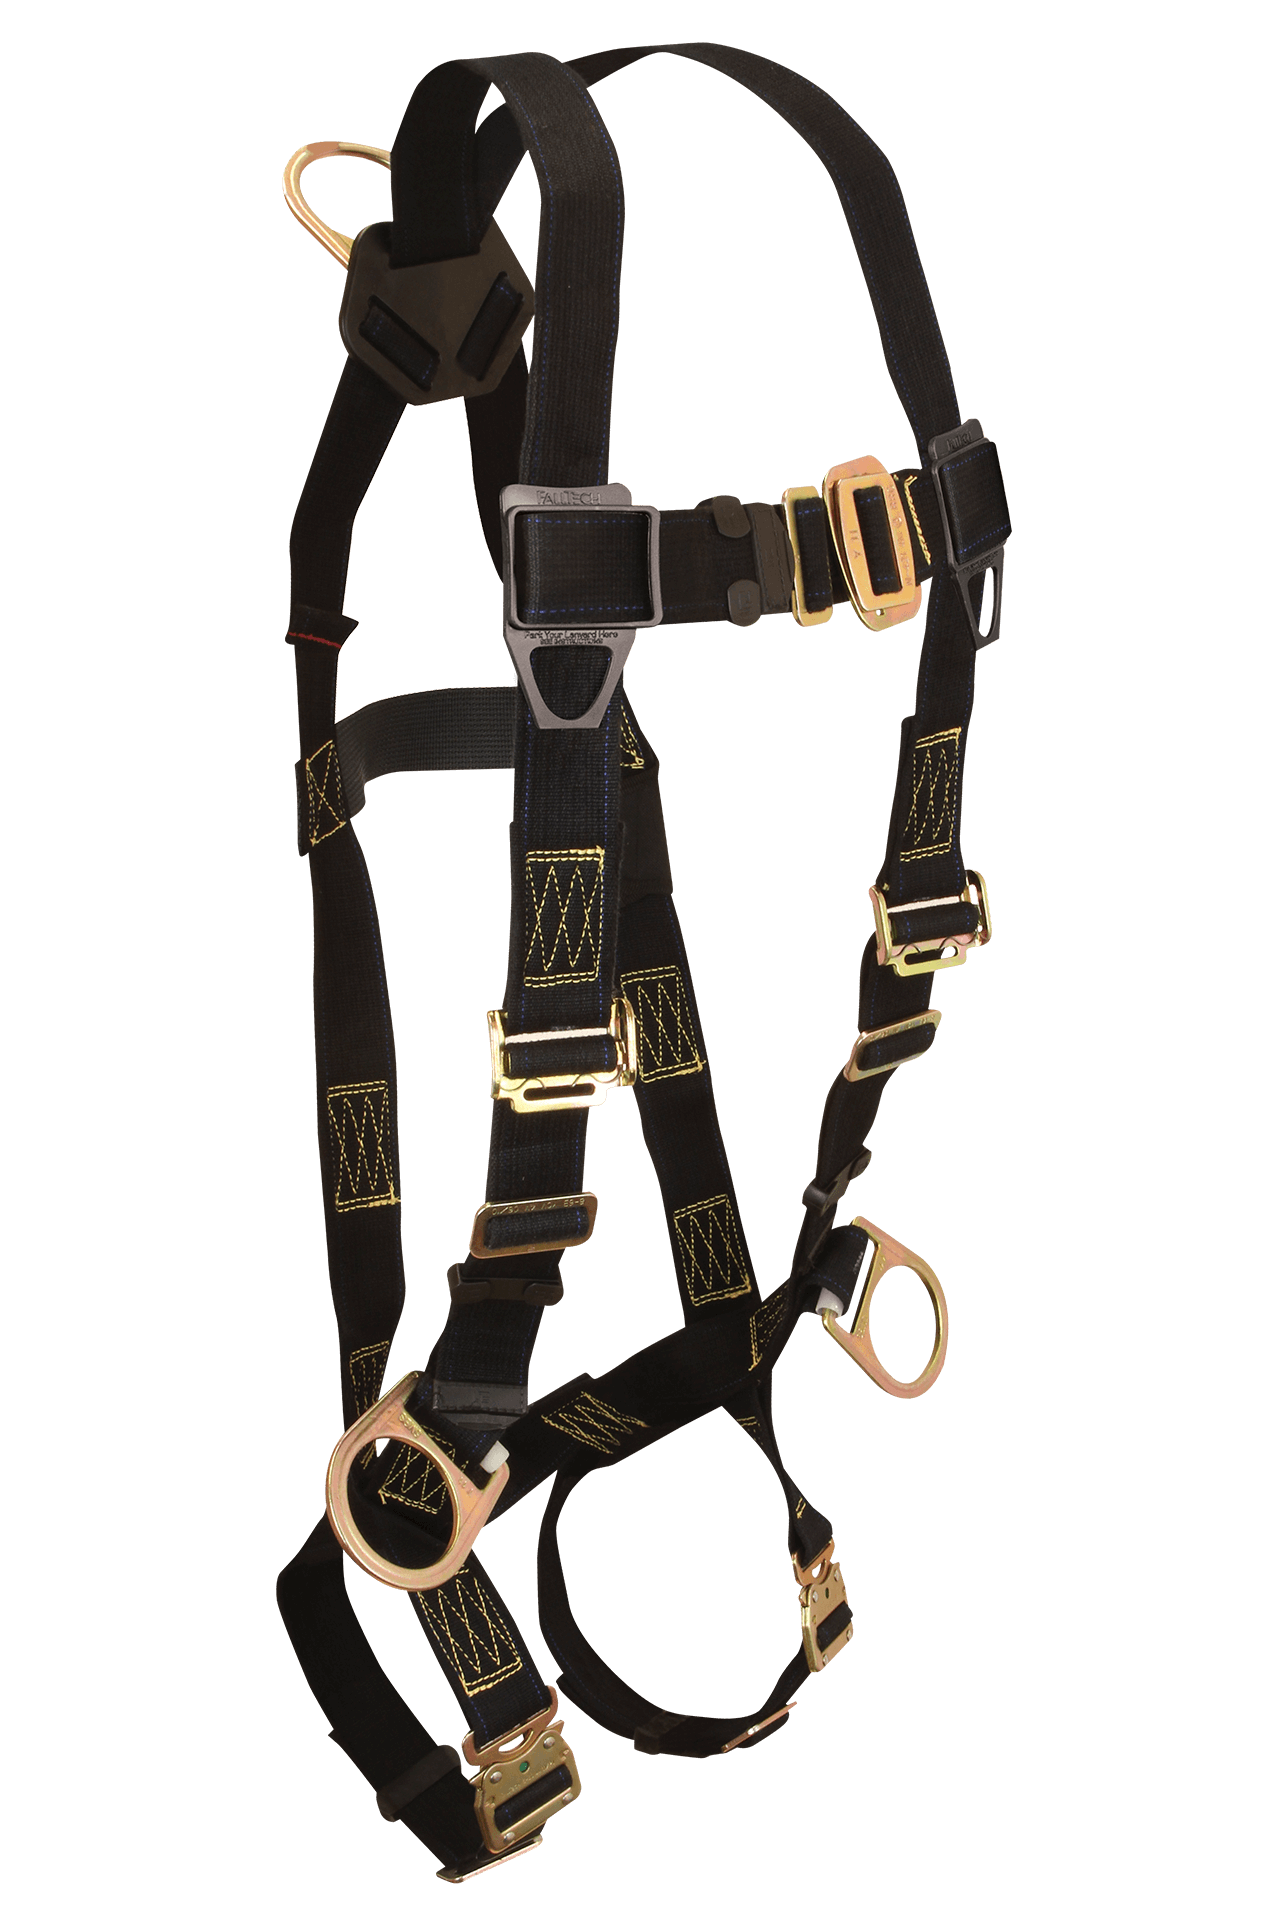 fall arrest protection industry construction scaffolding work full body  safety belt security harness